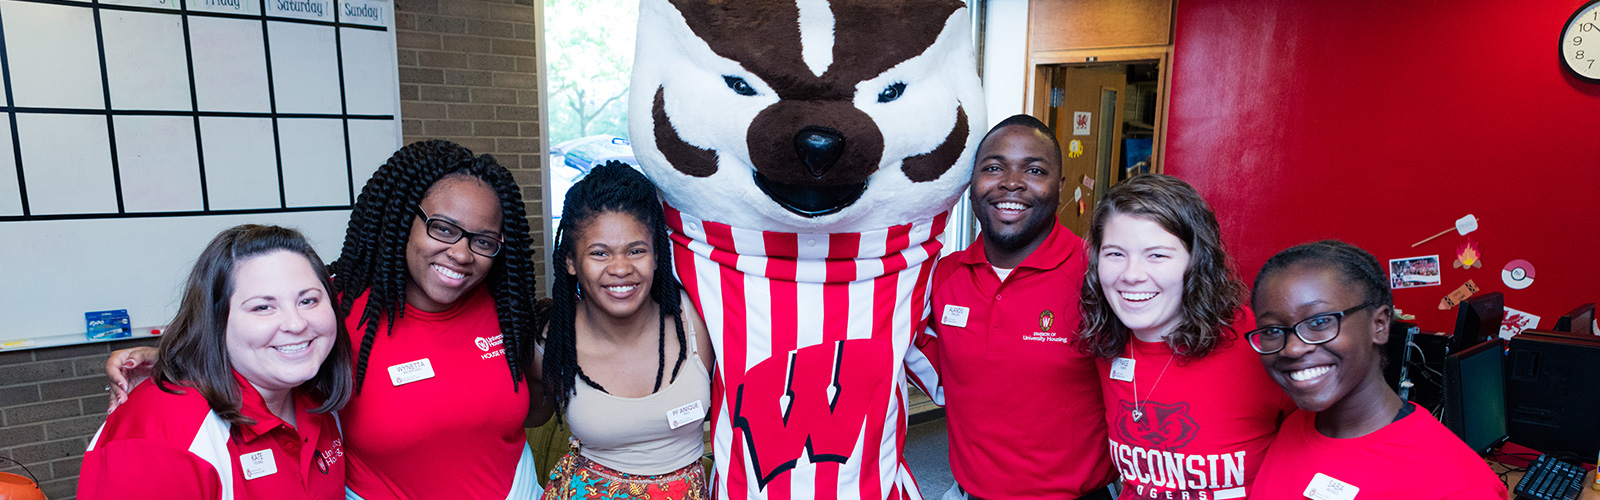 Bucky Badger with Residence Life staff